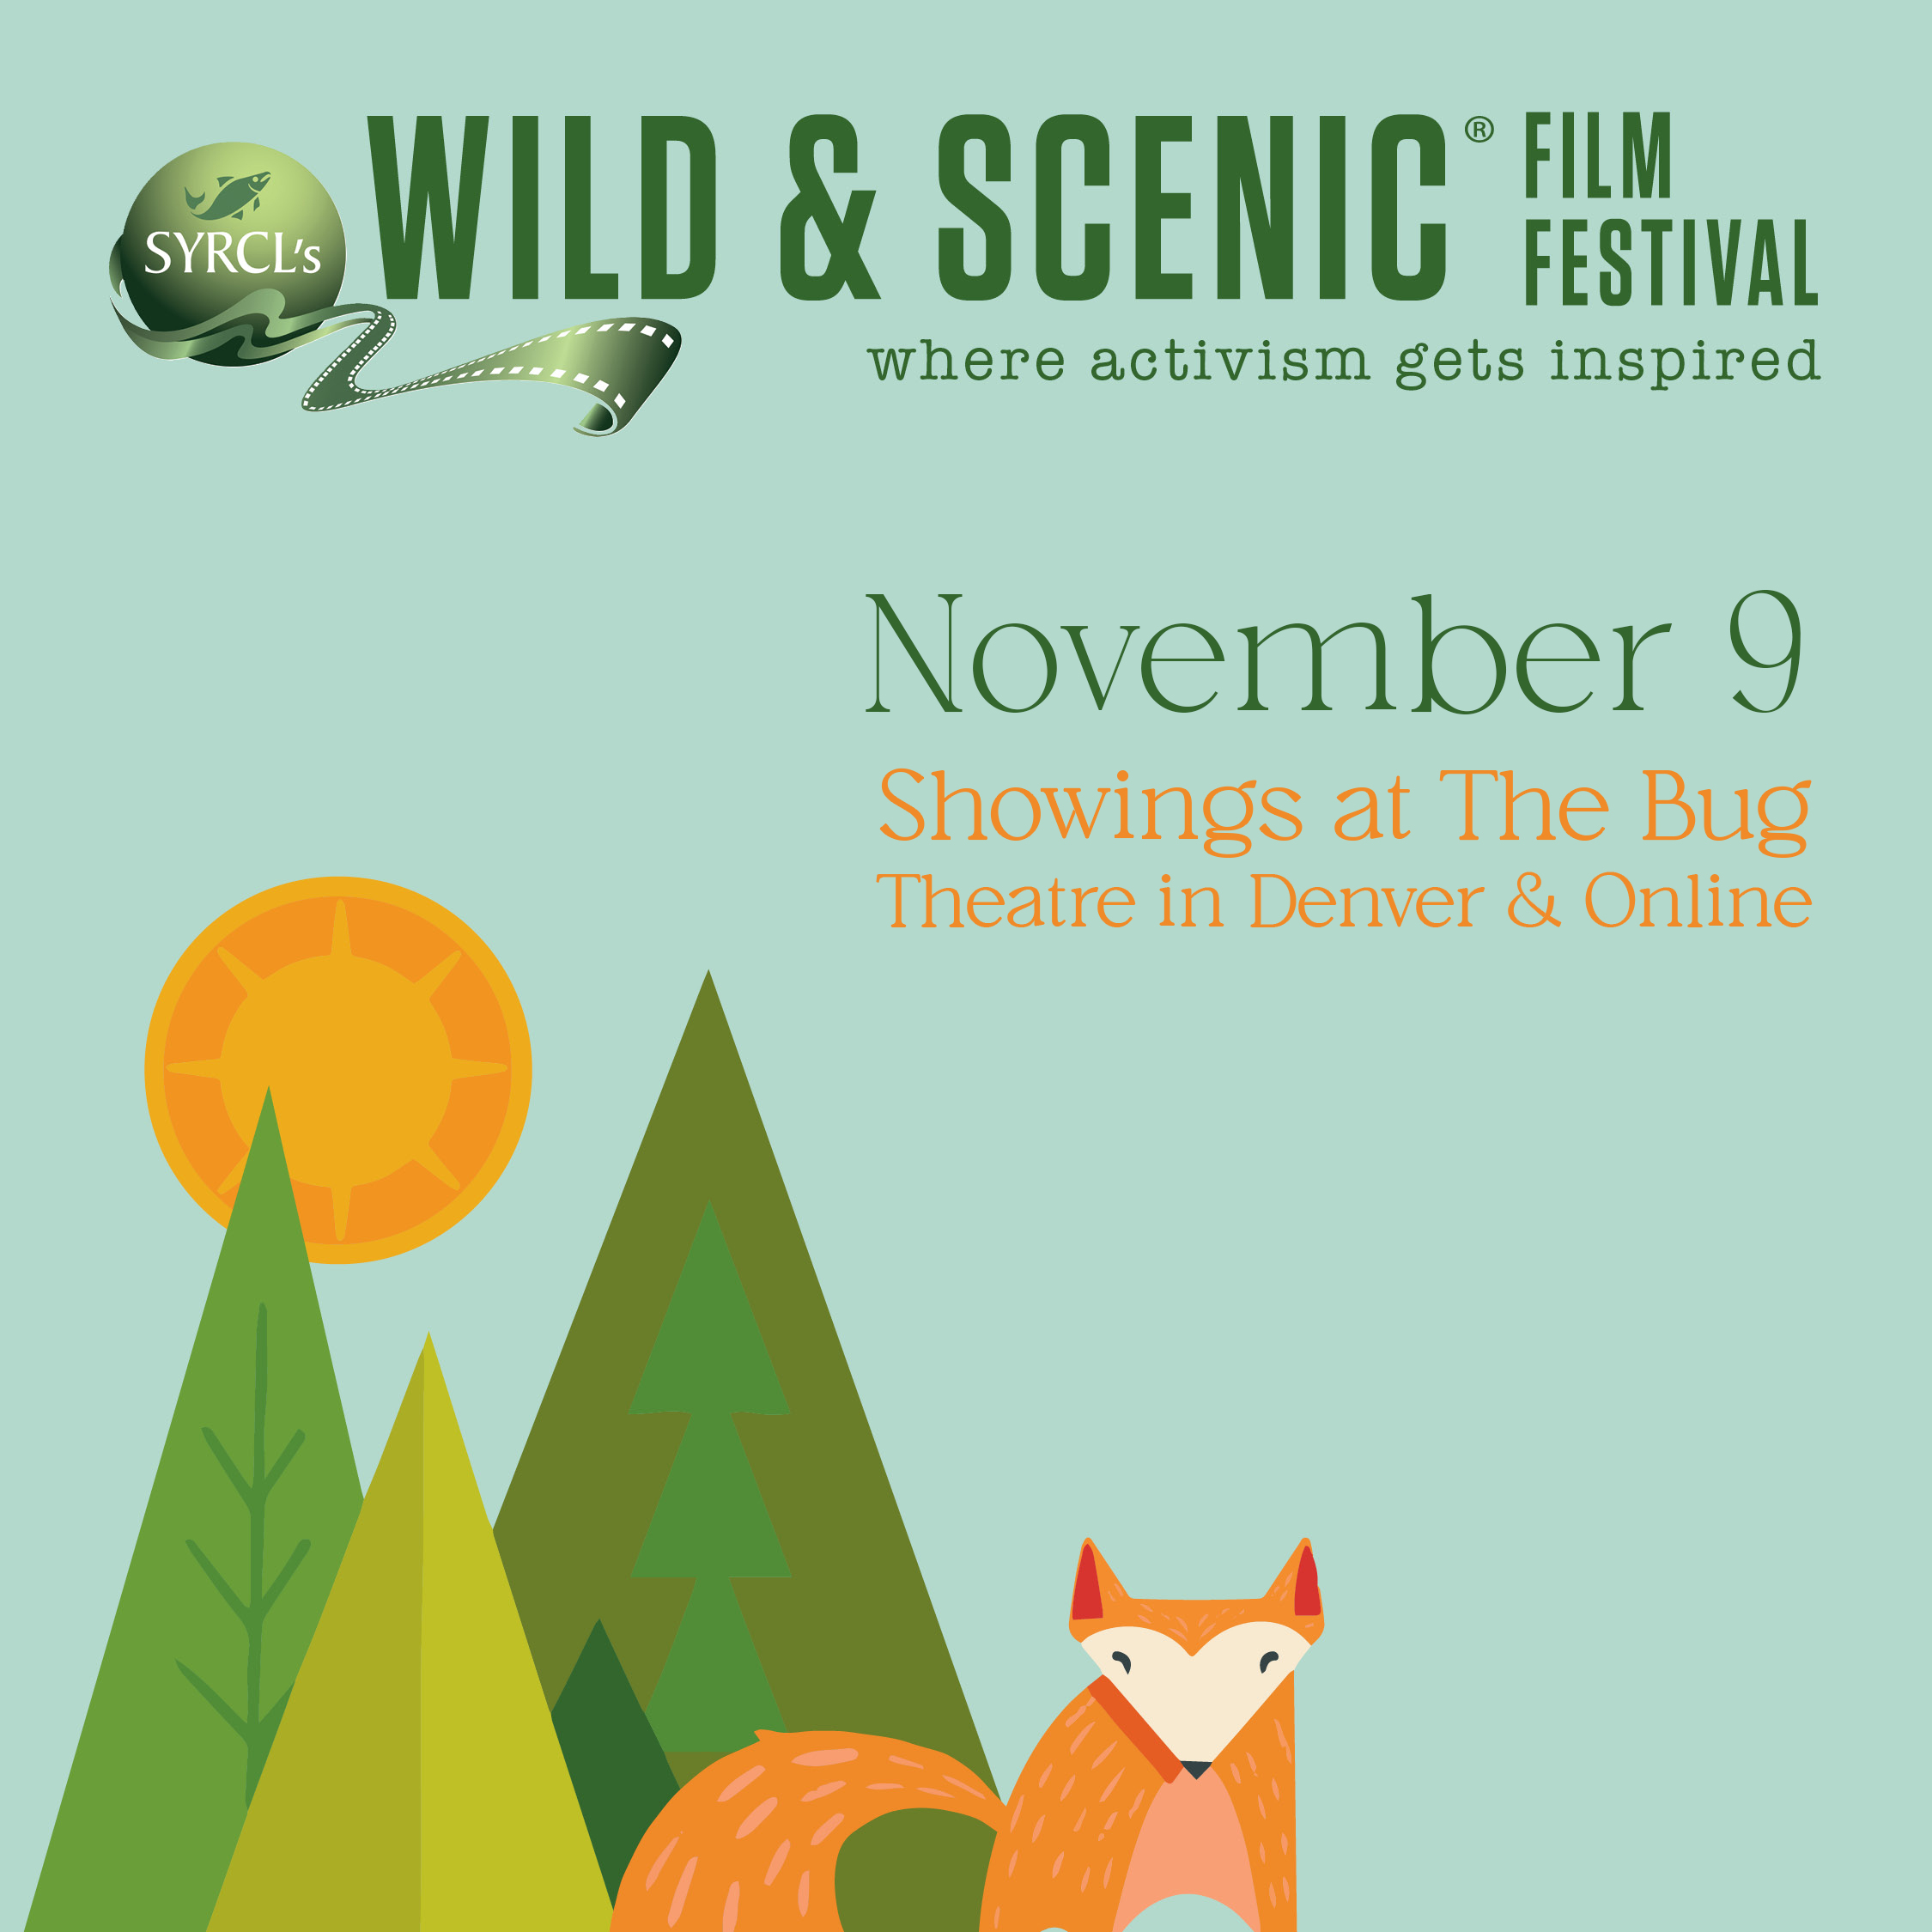 Banner has an illustration of a forested area with trees and a fox. At the top is the Wild & Scenic Film Festival logo and tag line "where activism gets inspired." In the middle, text says "November 9. Showings at The Bug Theatre in Denver & Online"